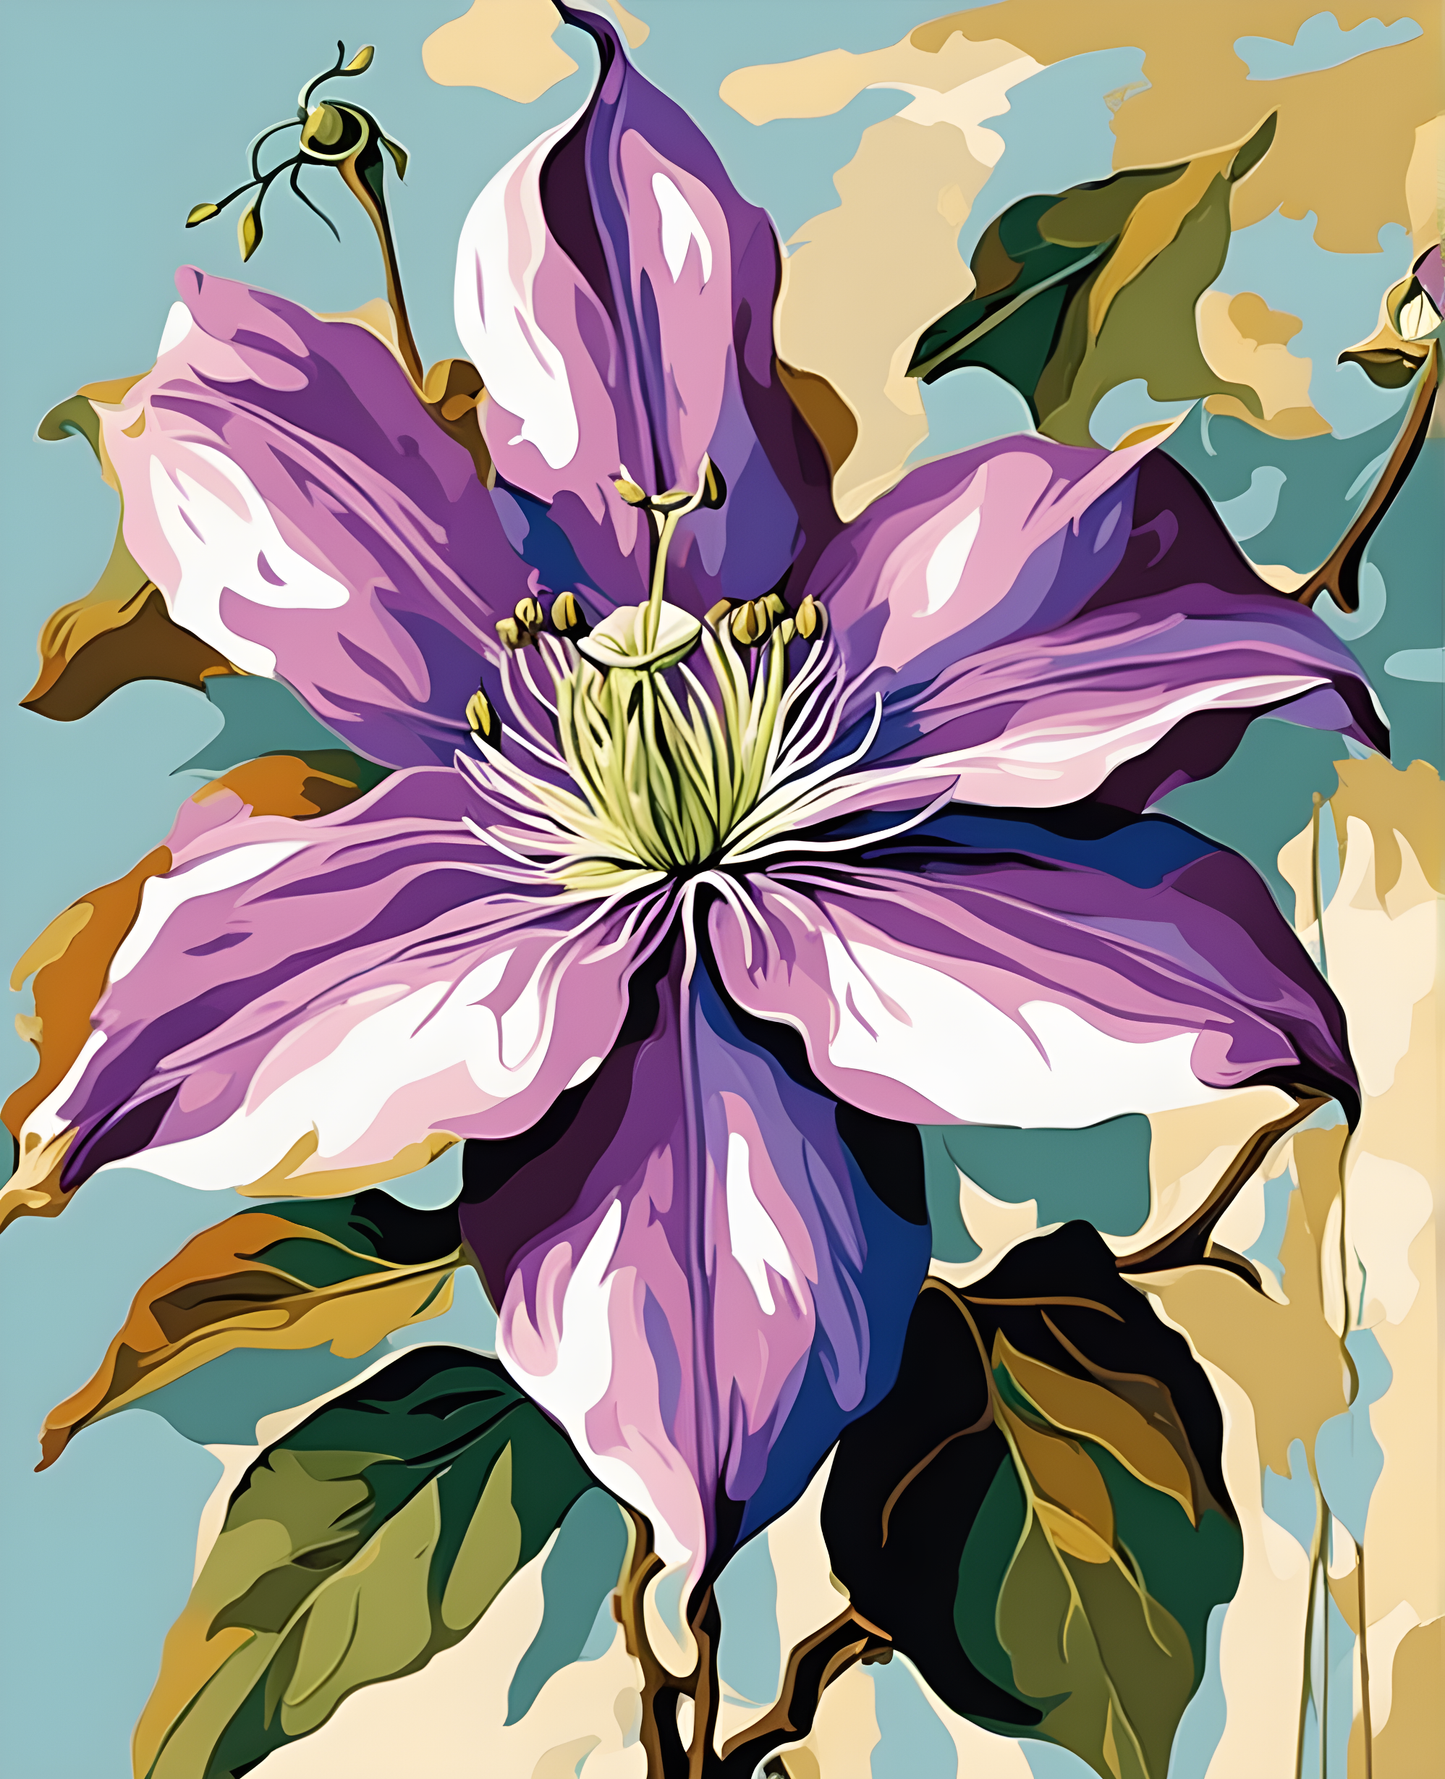 Flowers Collection OD (48) - Clematis - Van-Go Paint-By-Number Kit